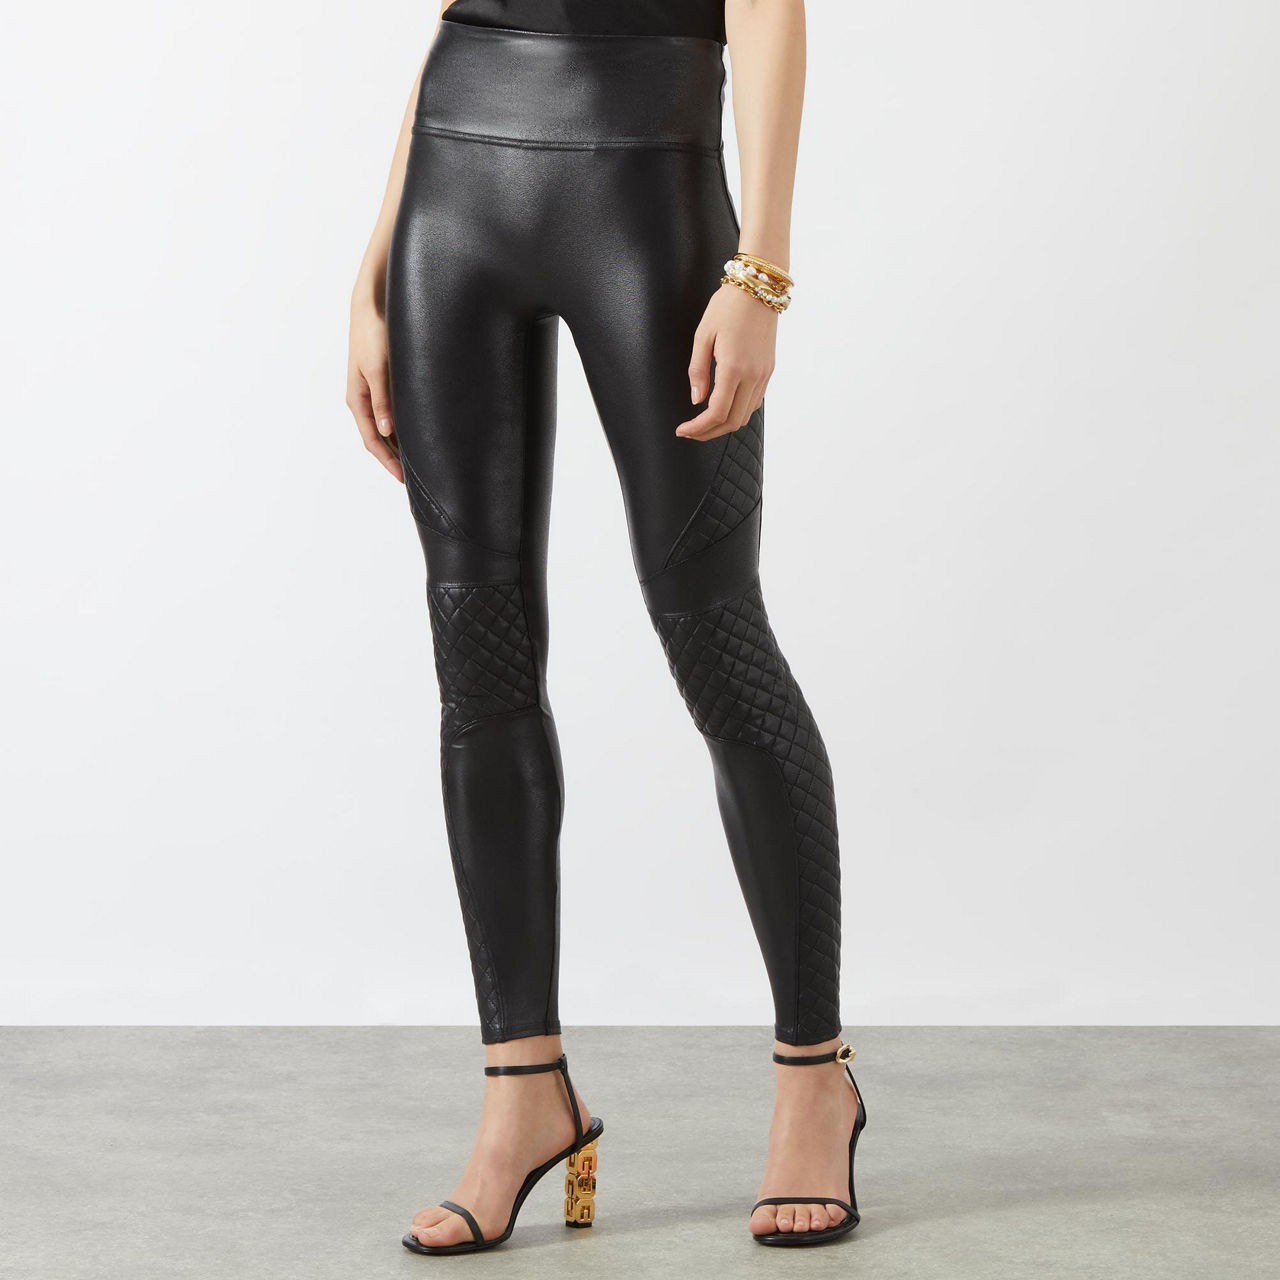 Brown Thomas - Wardrobe Wonder. For a hero staple you will return to again  and again, look no further than the figure-enhancing SPANX Faux Leather  Quilted Leggings. Shop #Spanx in store and